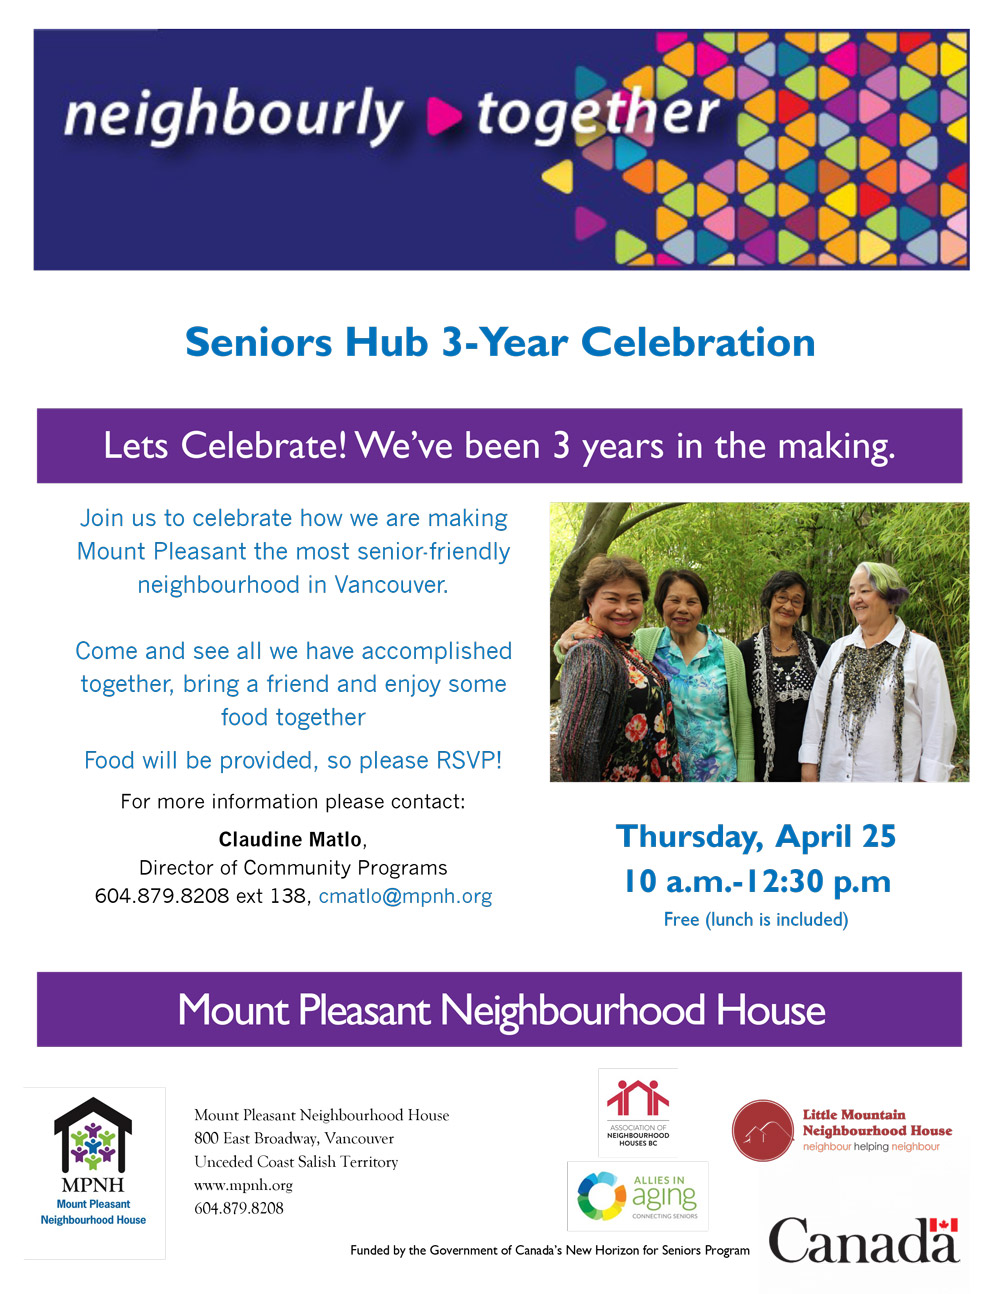 An image of the colourful event poster, with an image of four seniors smiling and socializing together outdoors.